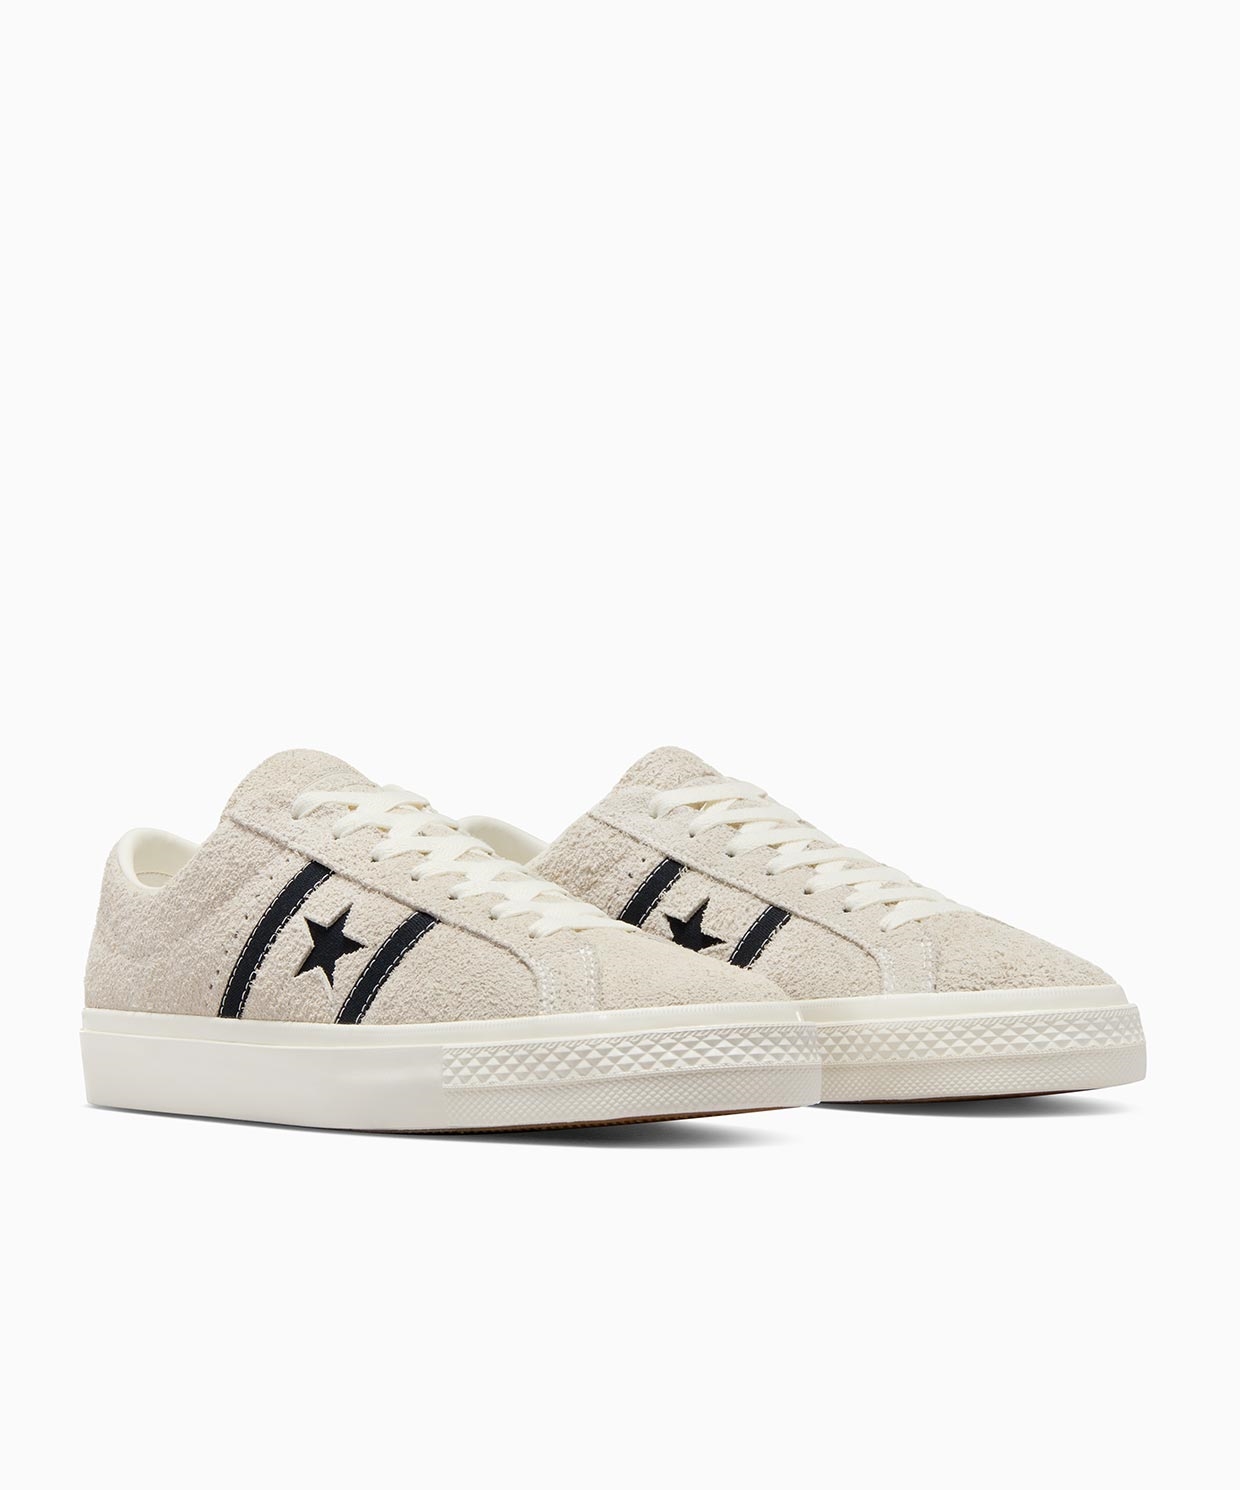 resm Converse One Star Academy Pro Suede